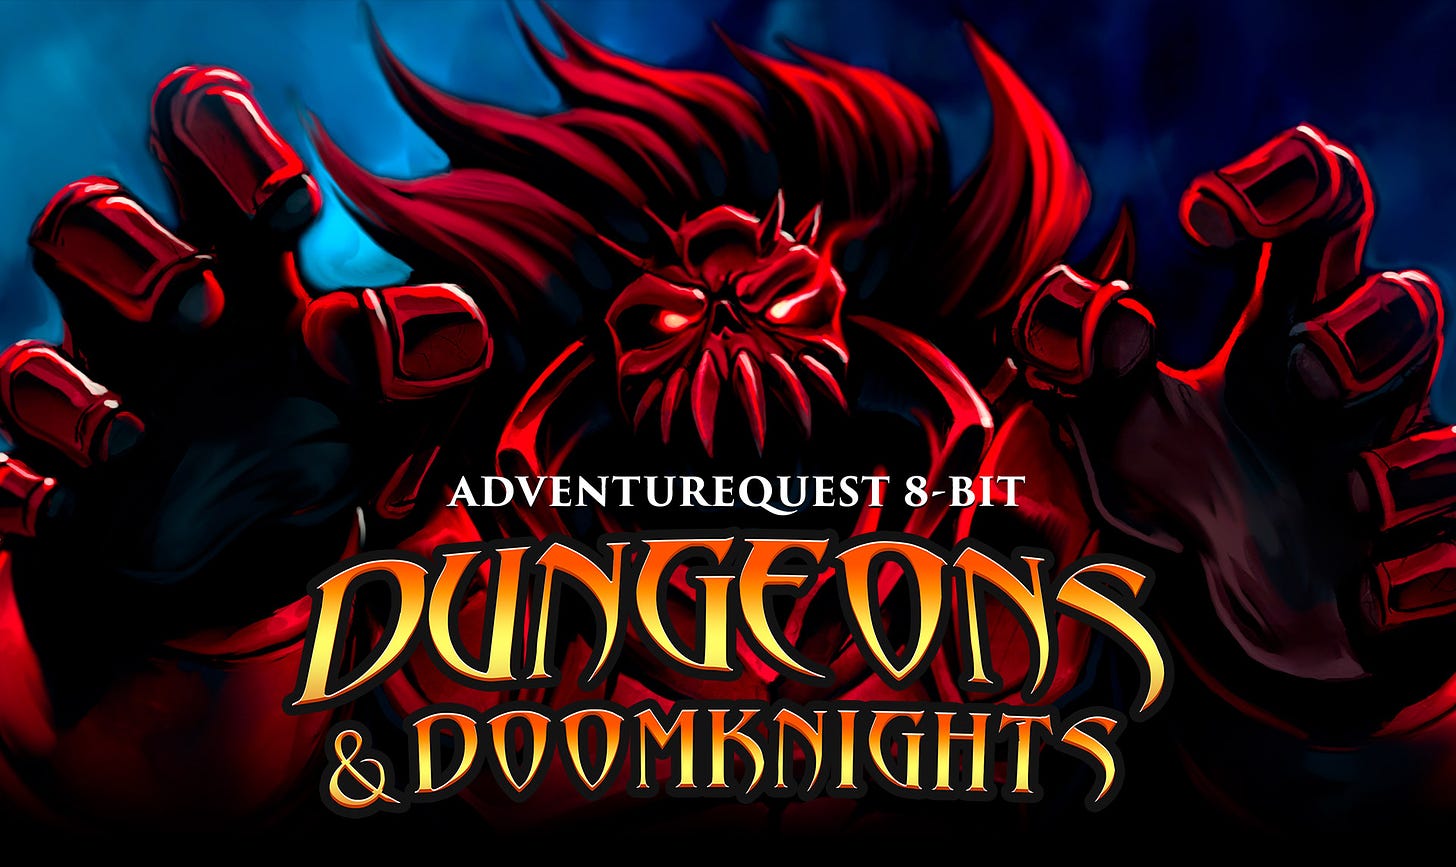 Dungeons & Doomknights - Dungeons and Doomknights - A new game for the NES!